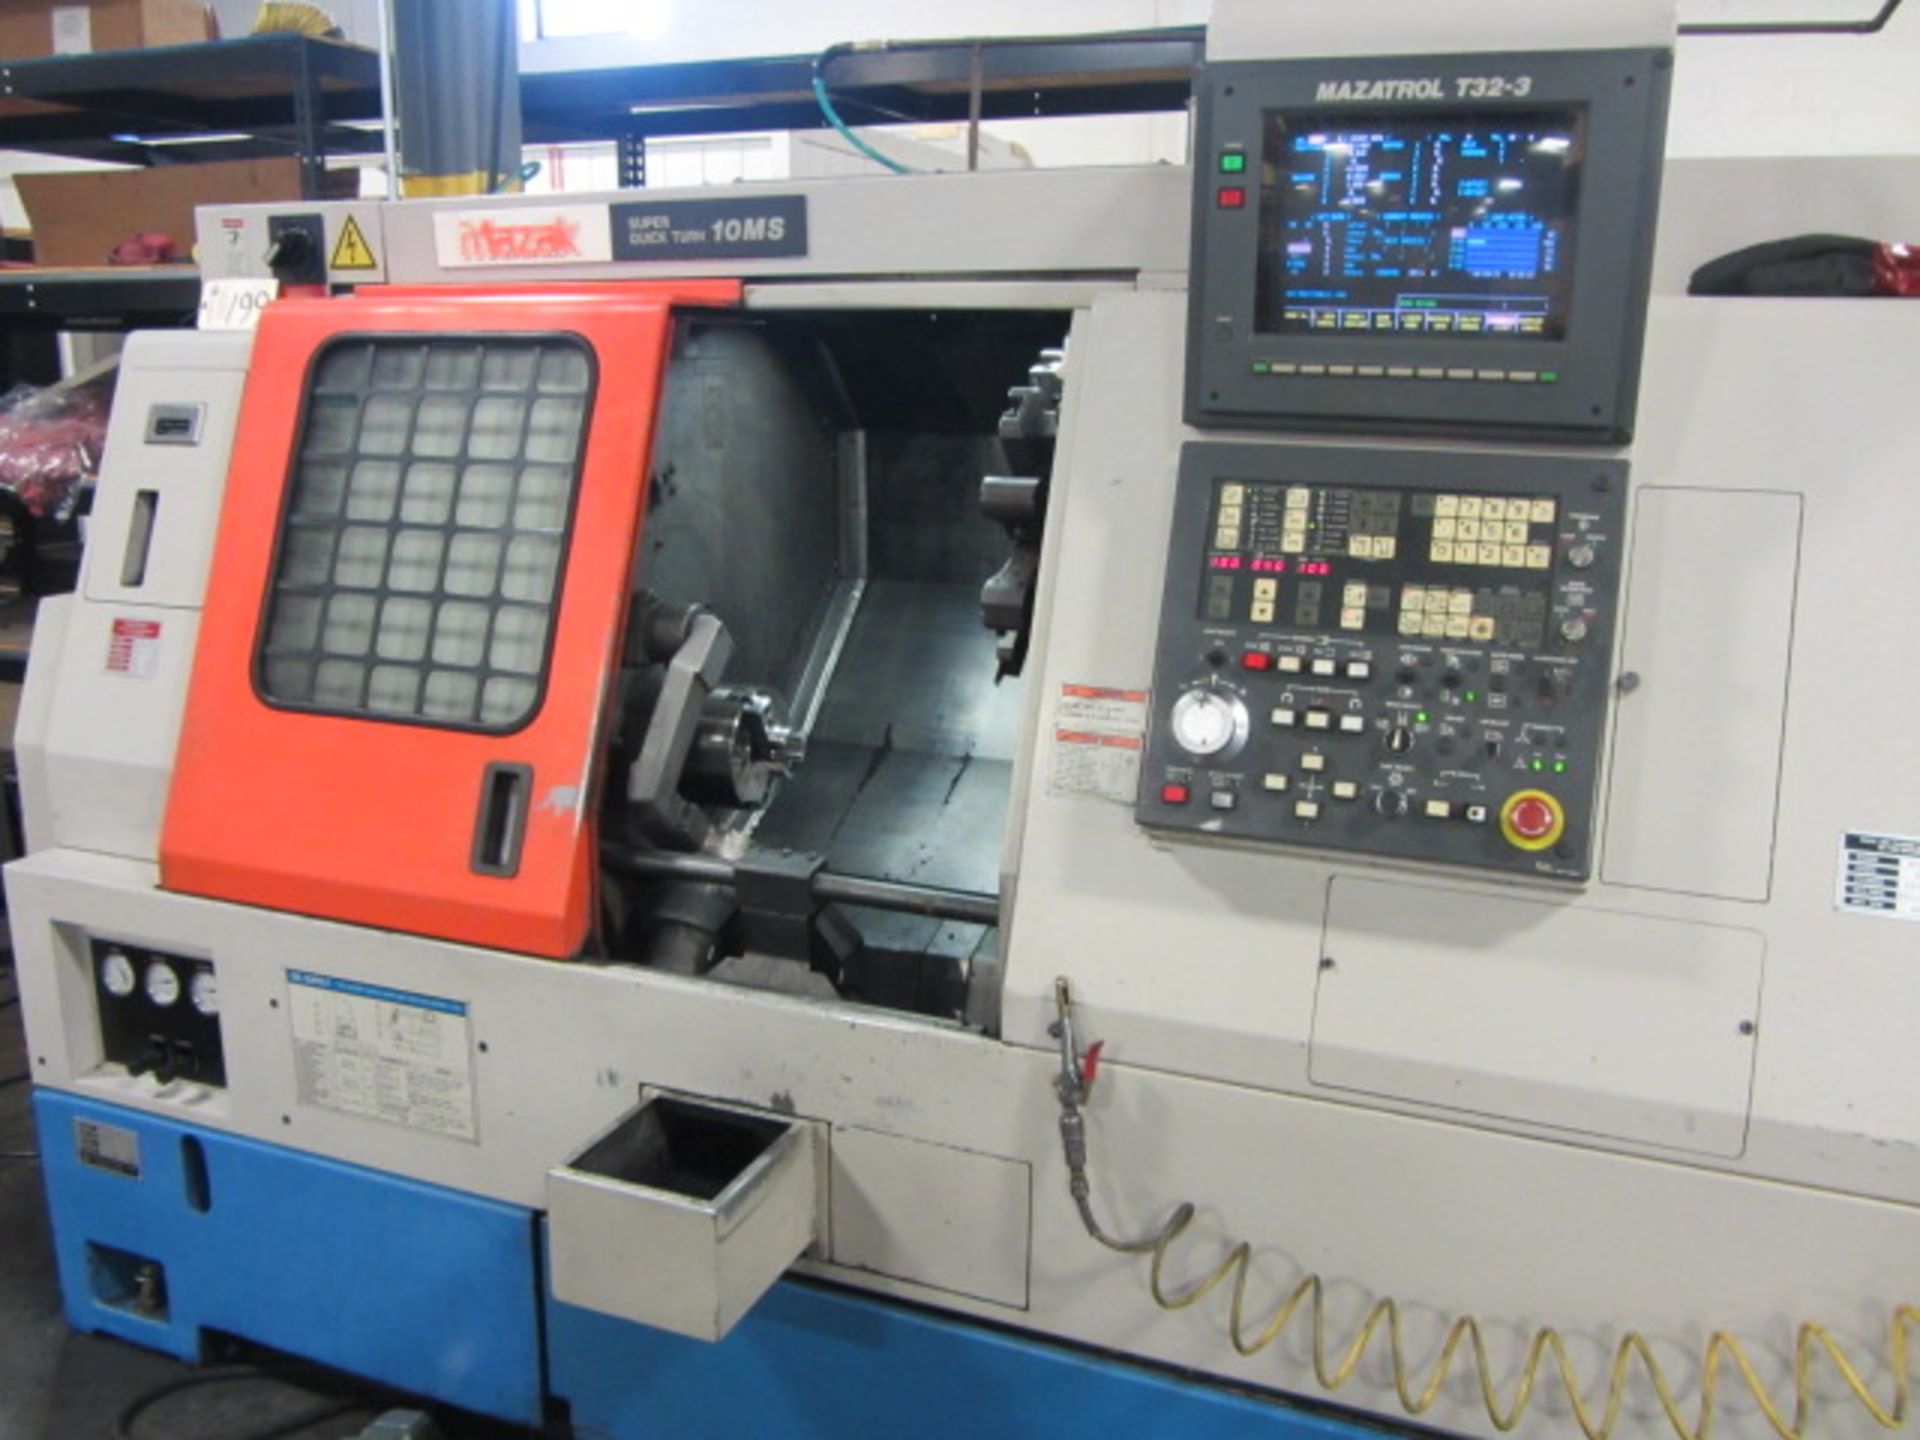 Mazak Super Quick Turn 10MS CNC Turning Center with Sub-Spindle, Milling, 6'' 3-Jaw Power Chuck, - Image 5 of 8